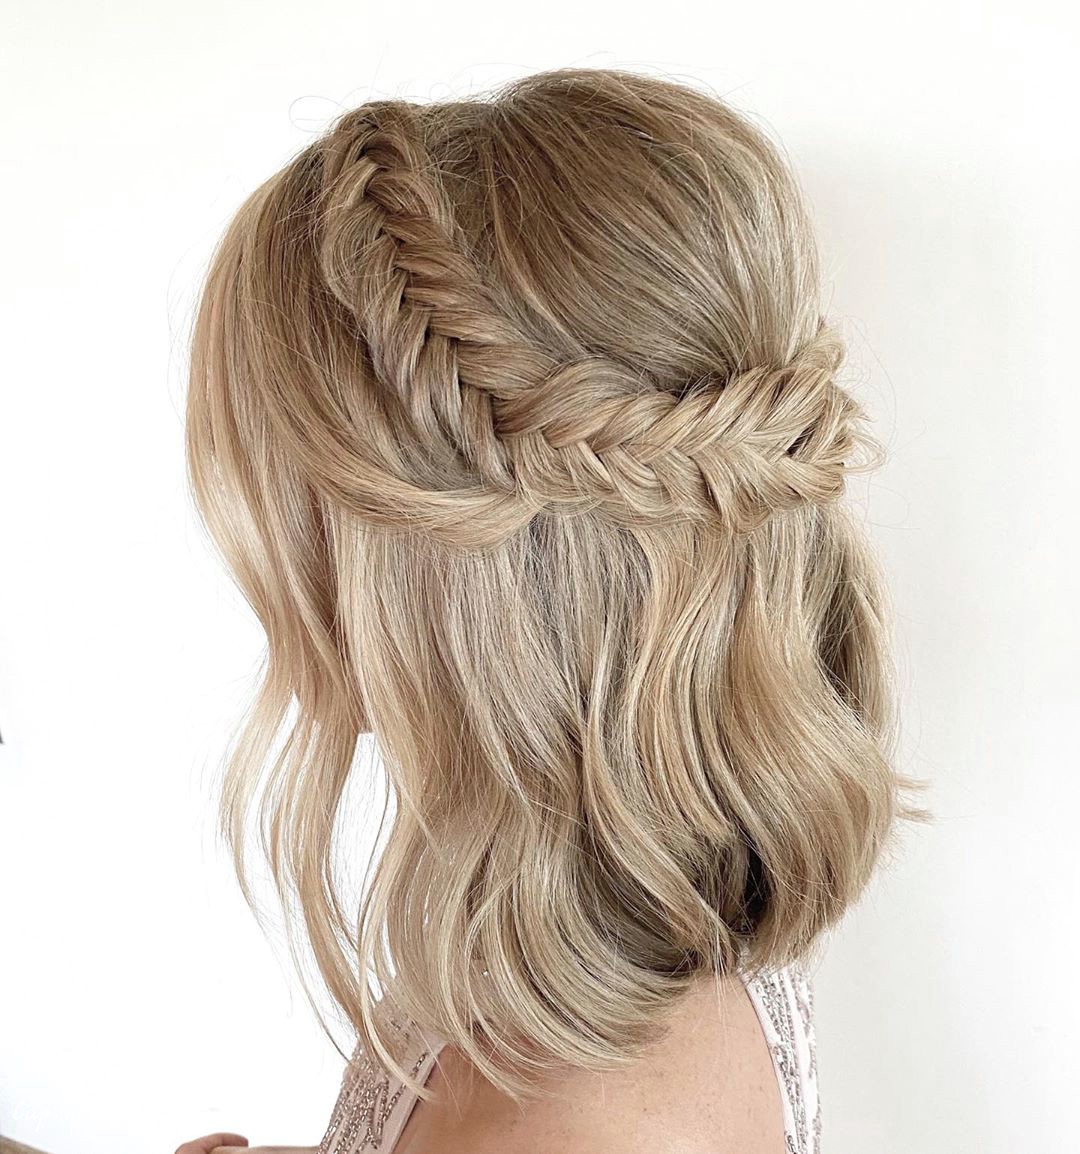 braided with wavy texture